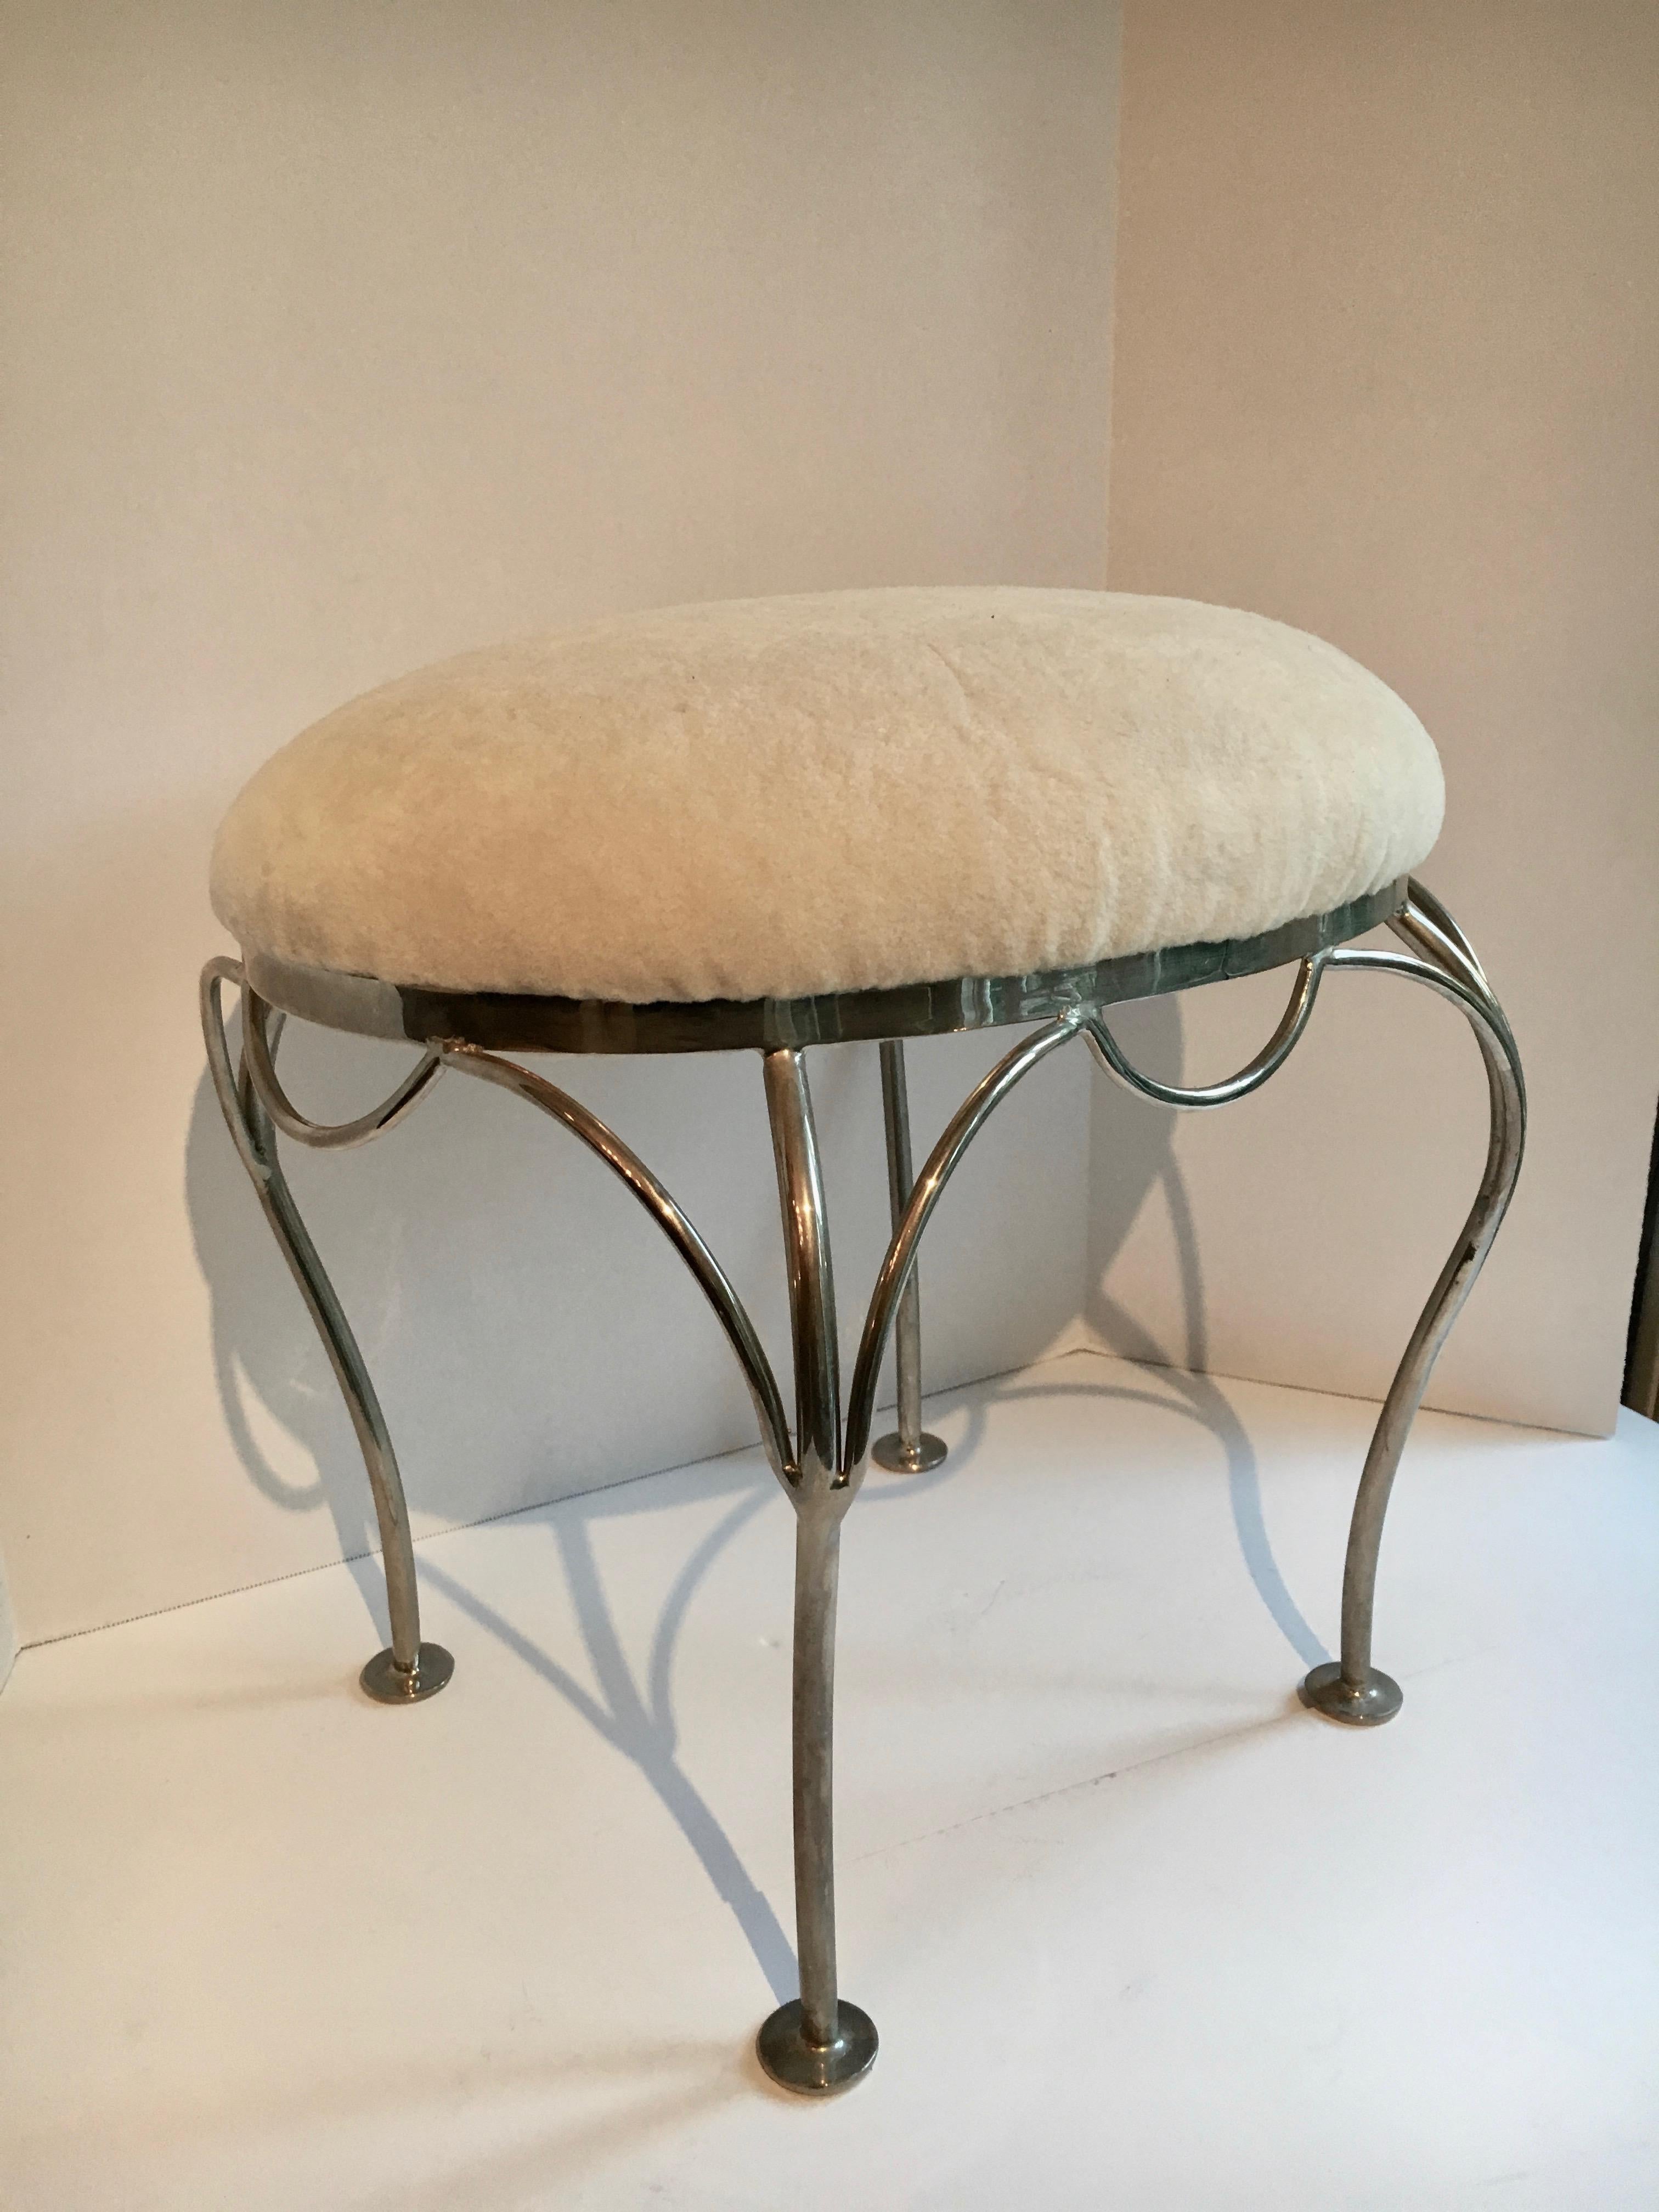 Nickel-Plated Vanity Stool with Shearling Seat 2